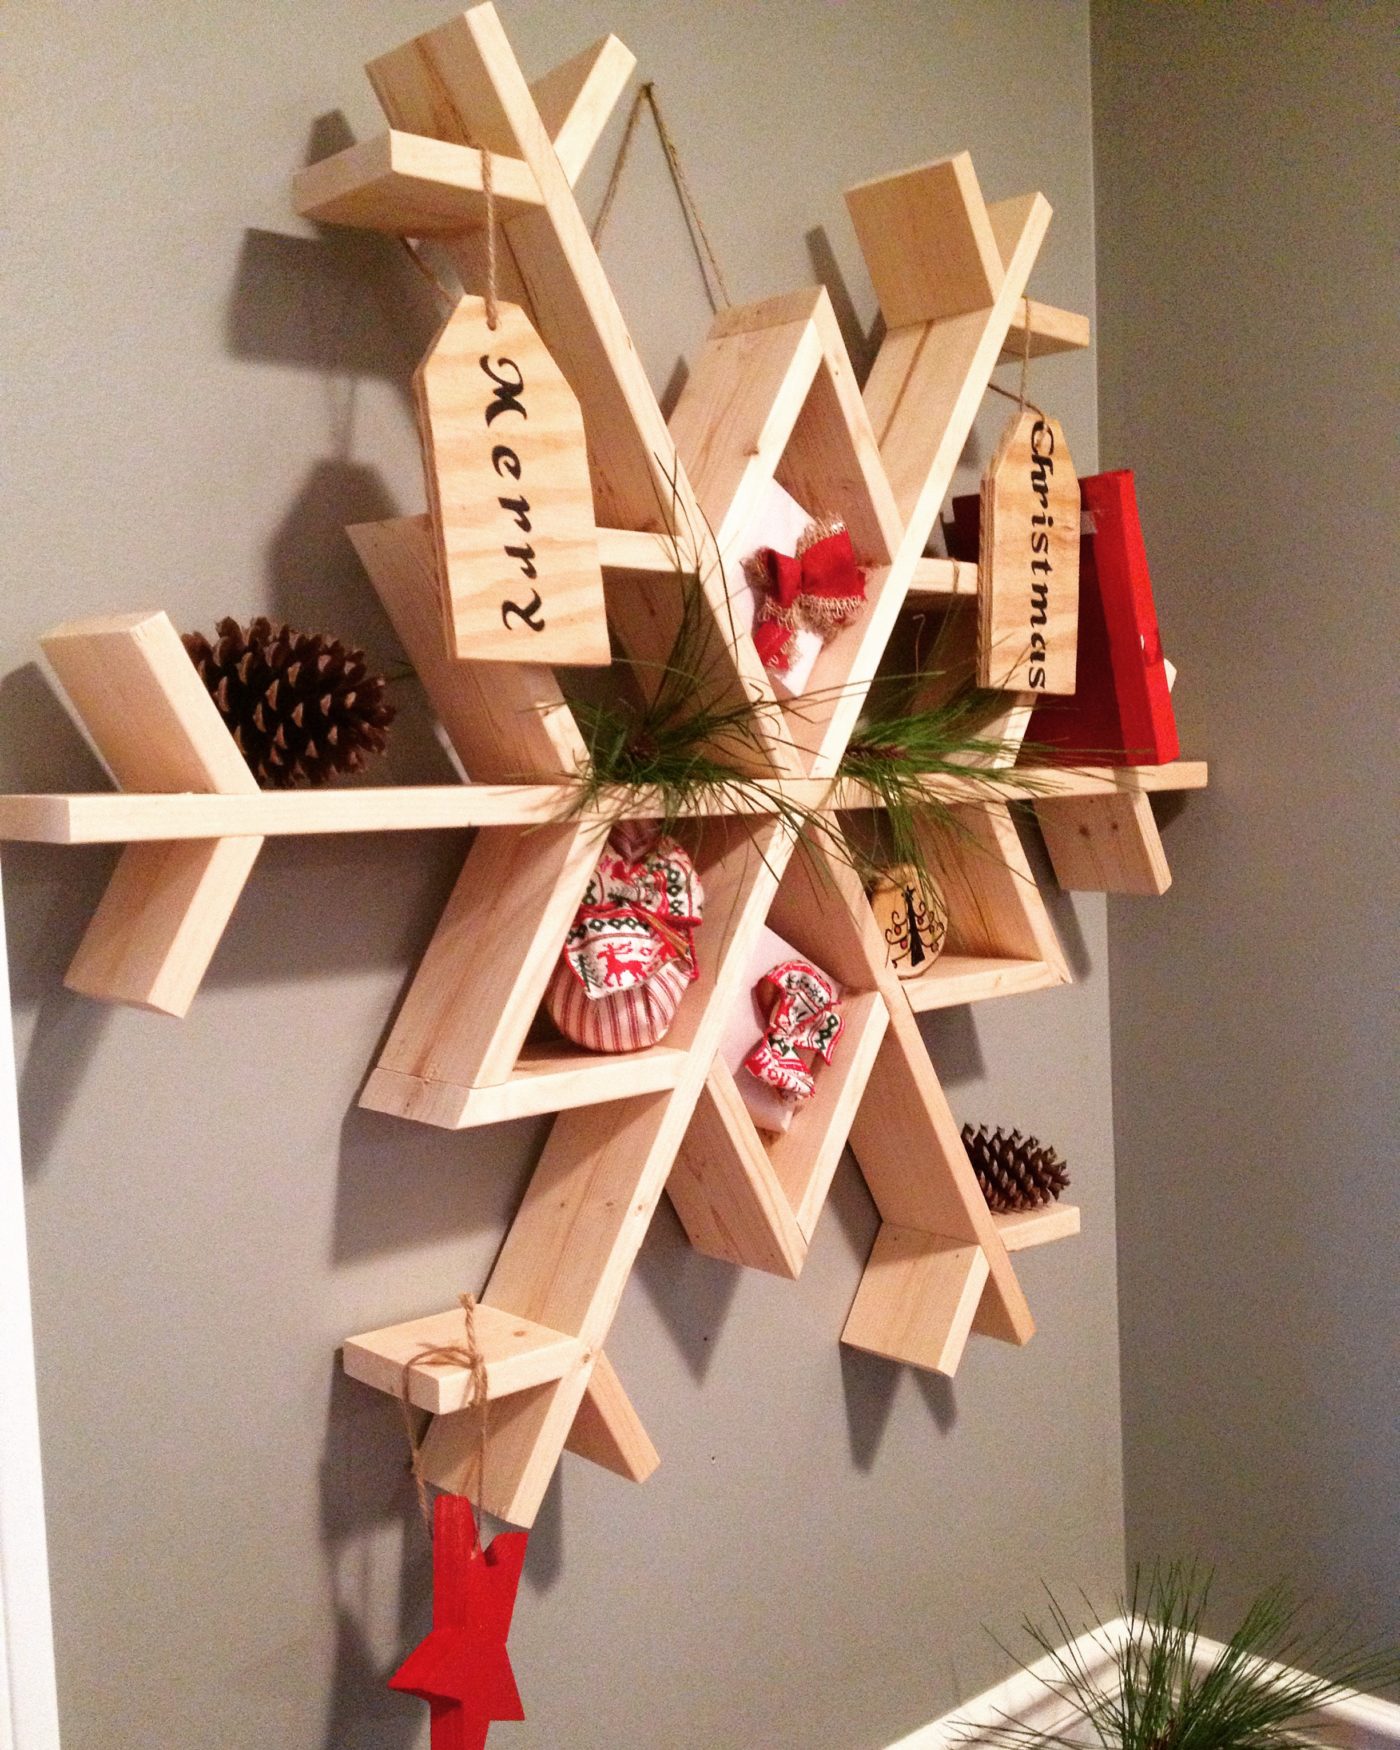 DIY snowflake shelf made from 1x4 boards